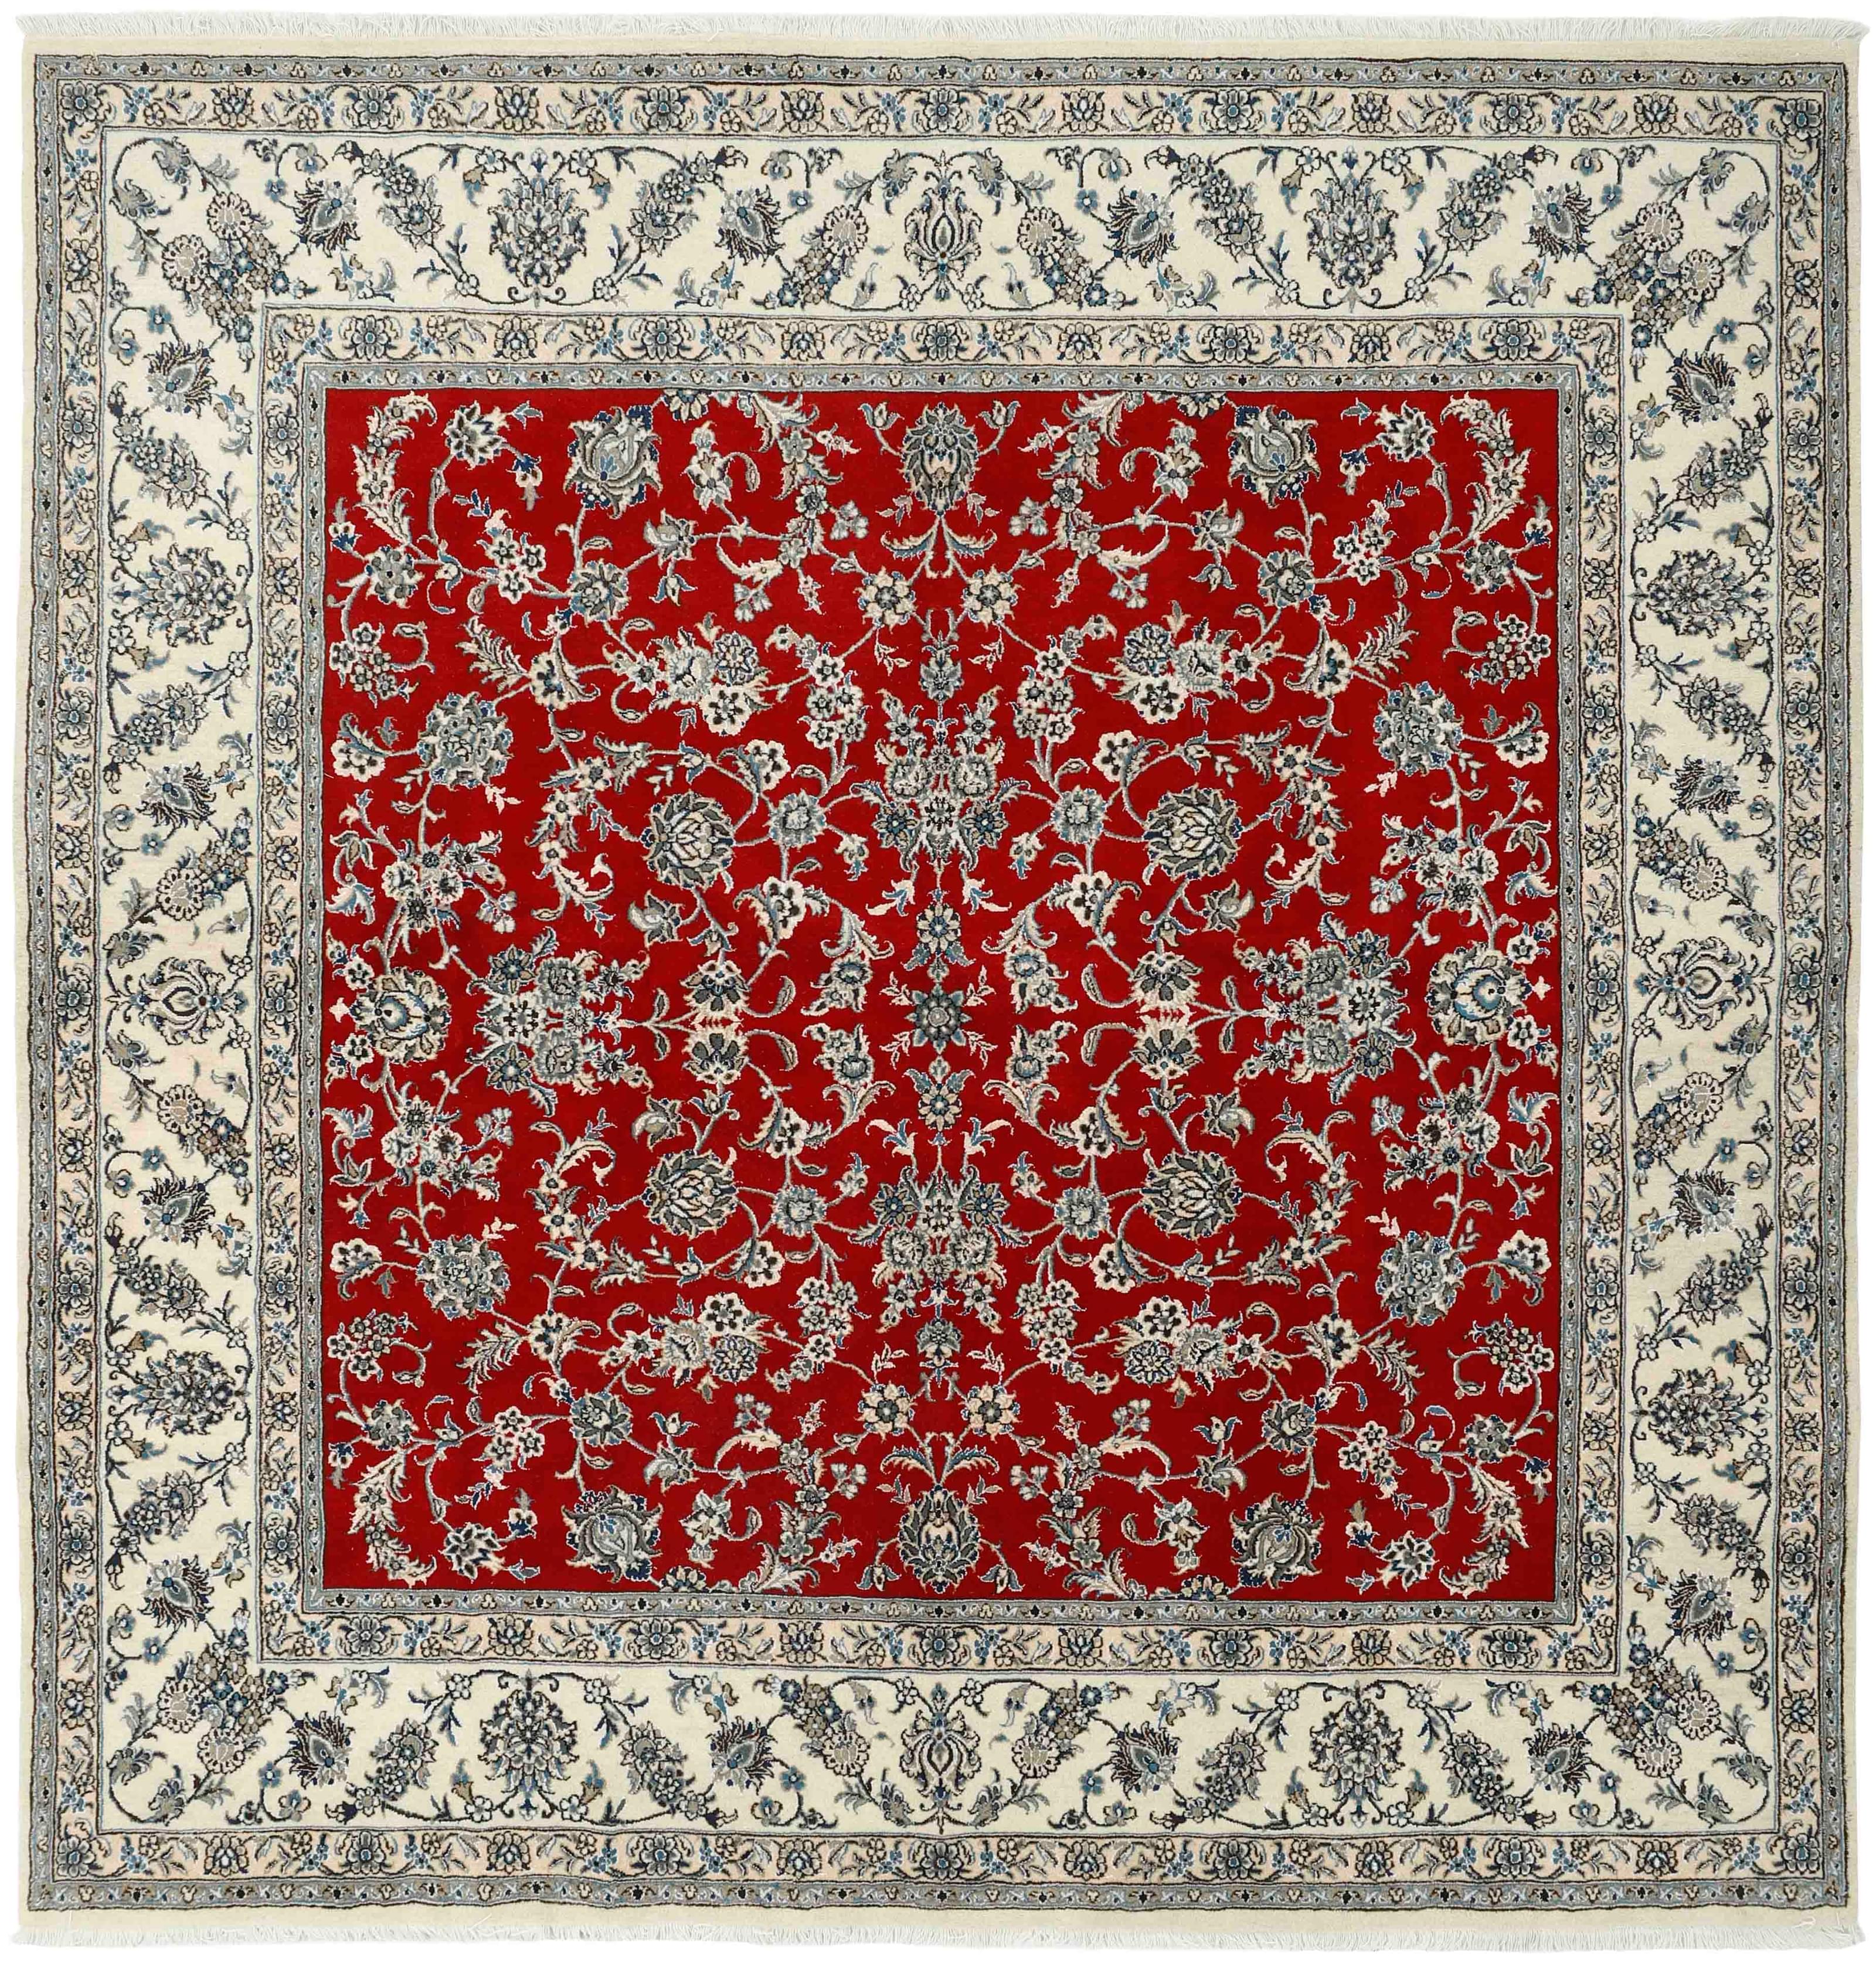 Authentic persian rug with a traditional floral design in red and cream